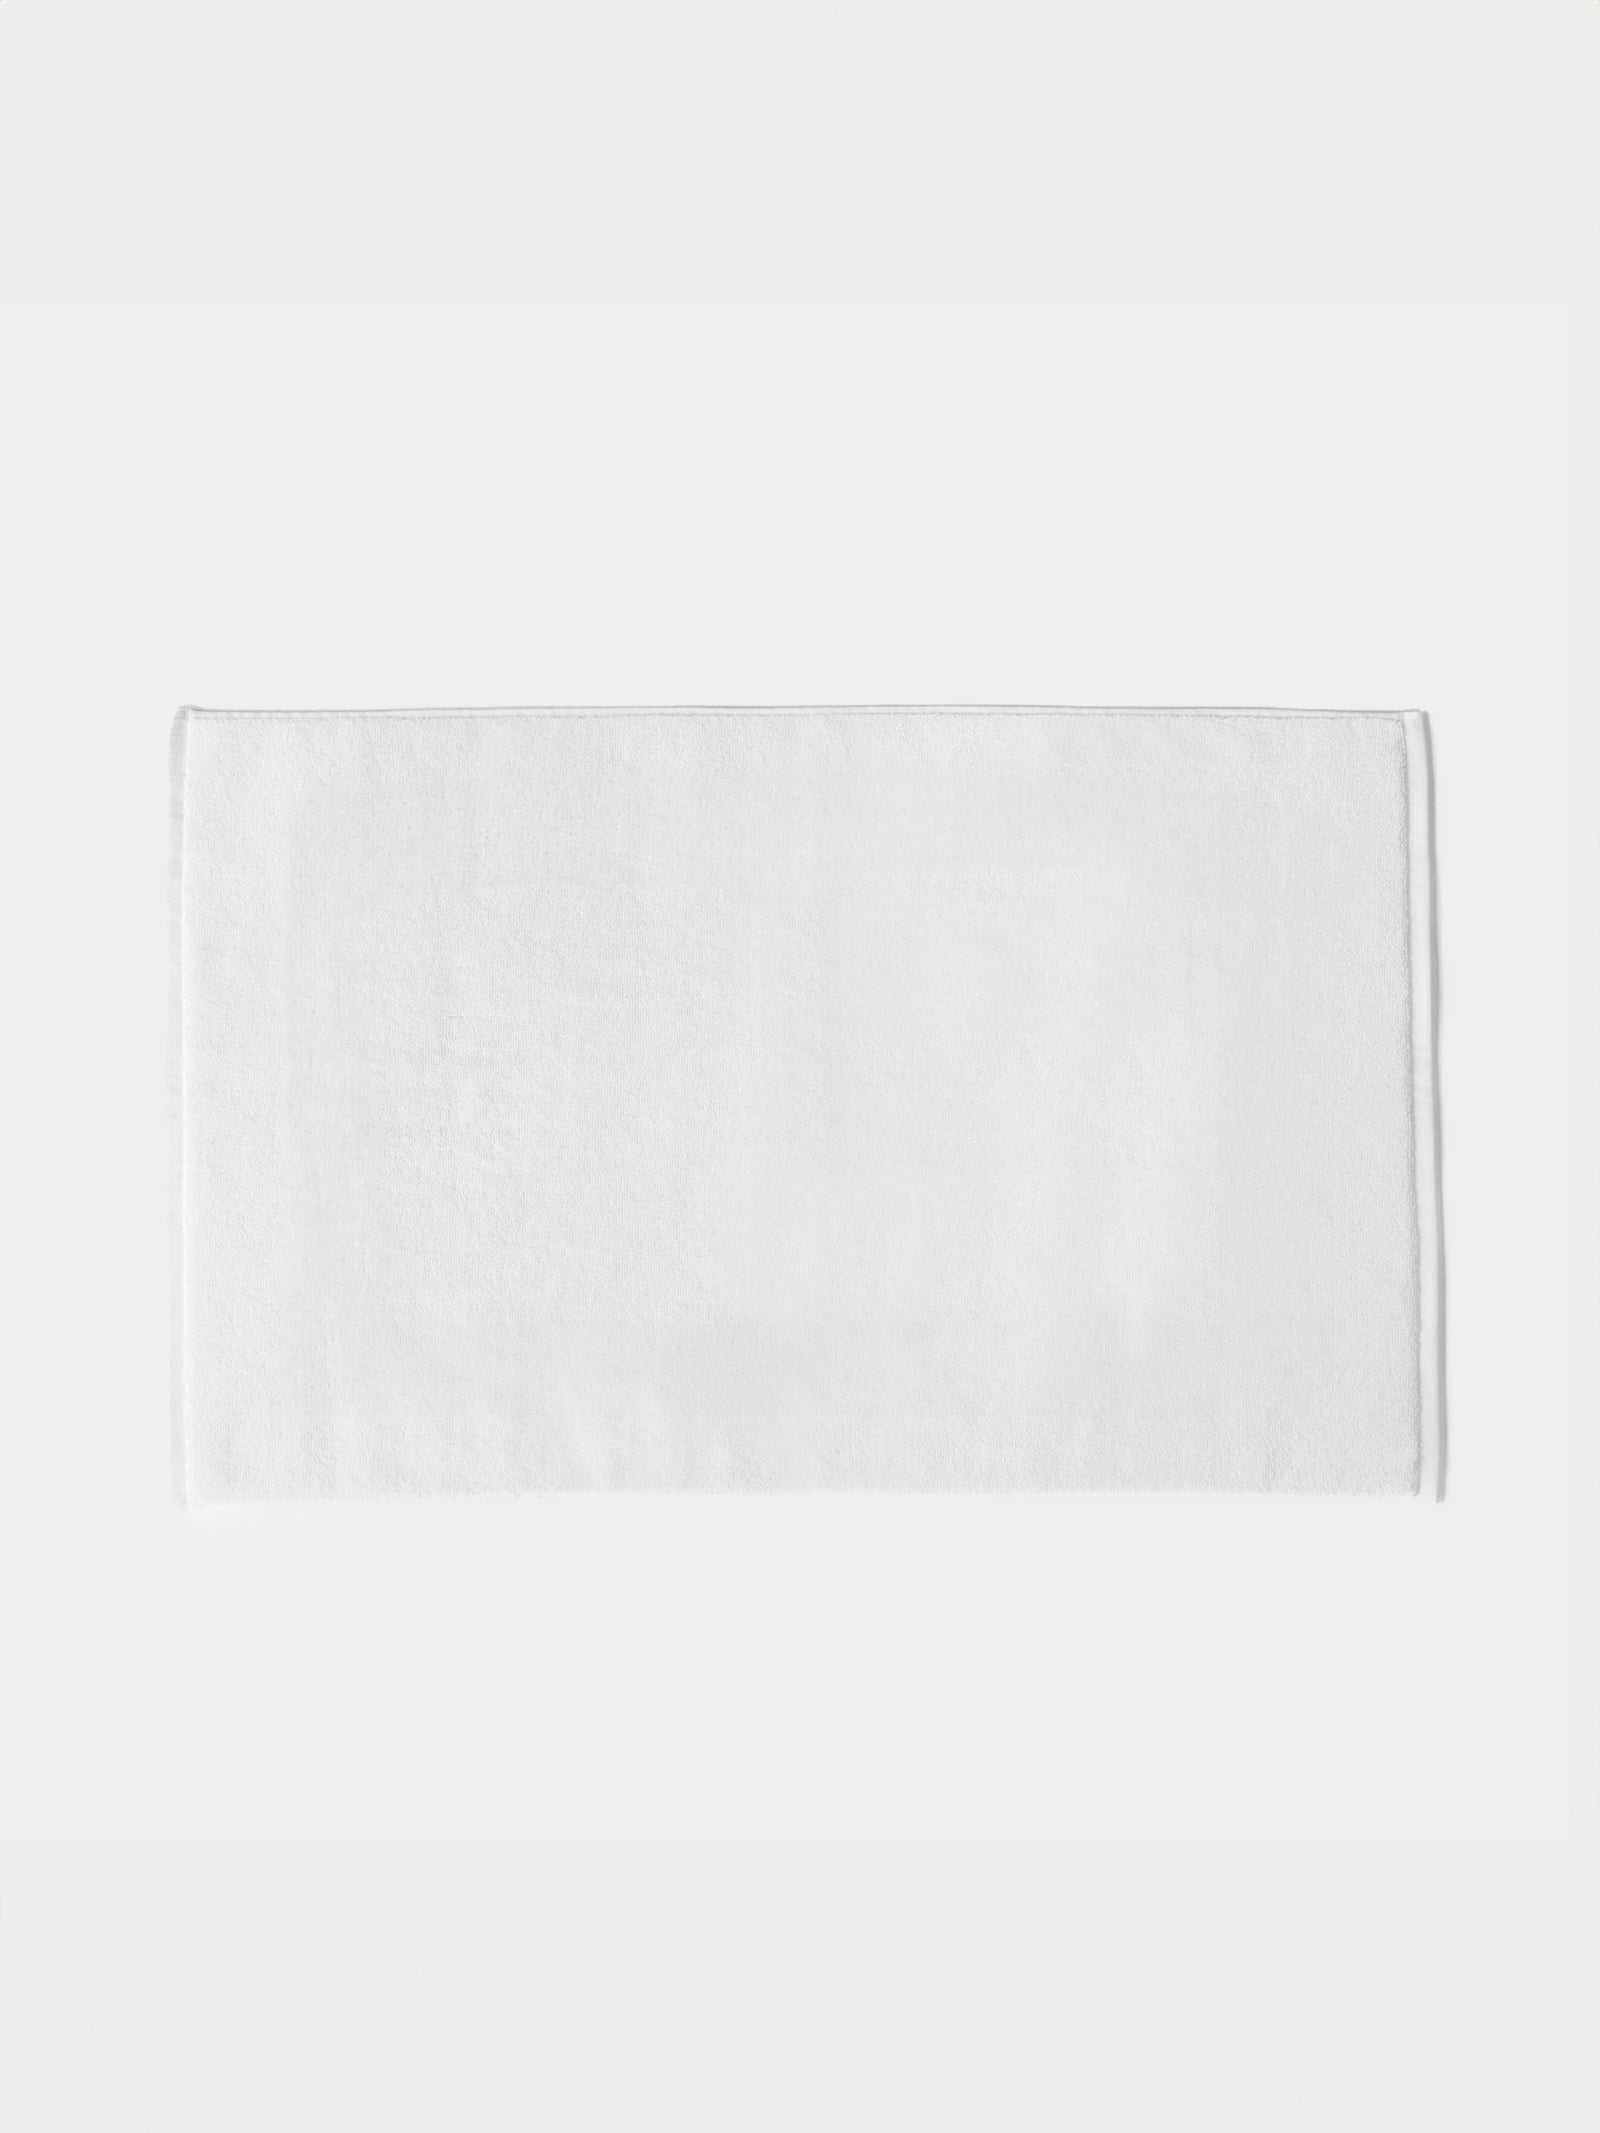 White looped terry bath mat resting on white background.